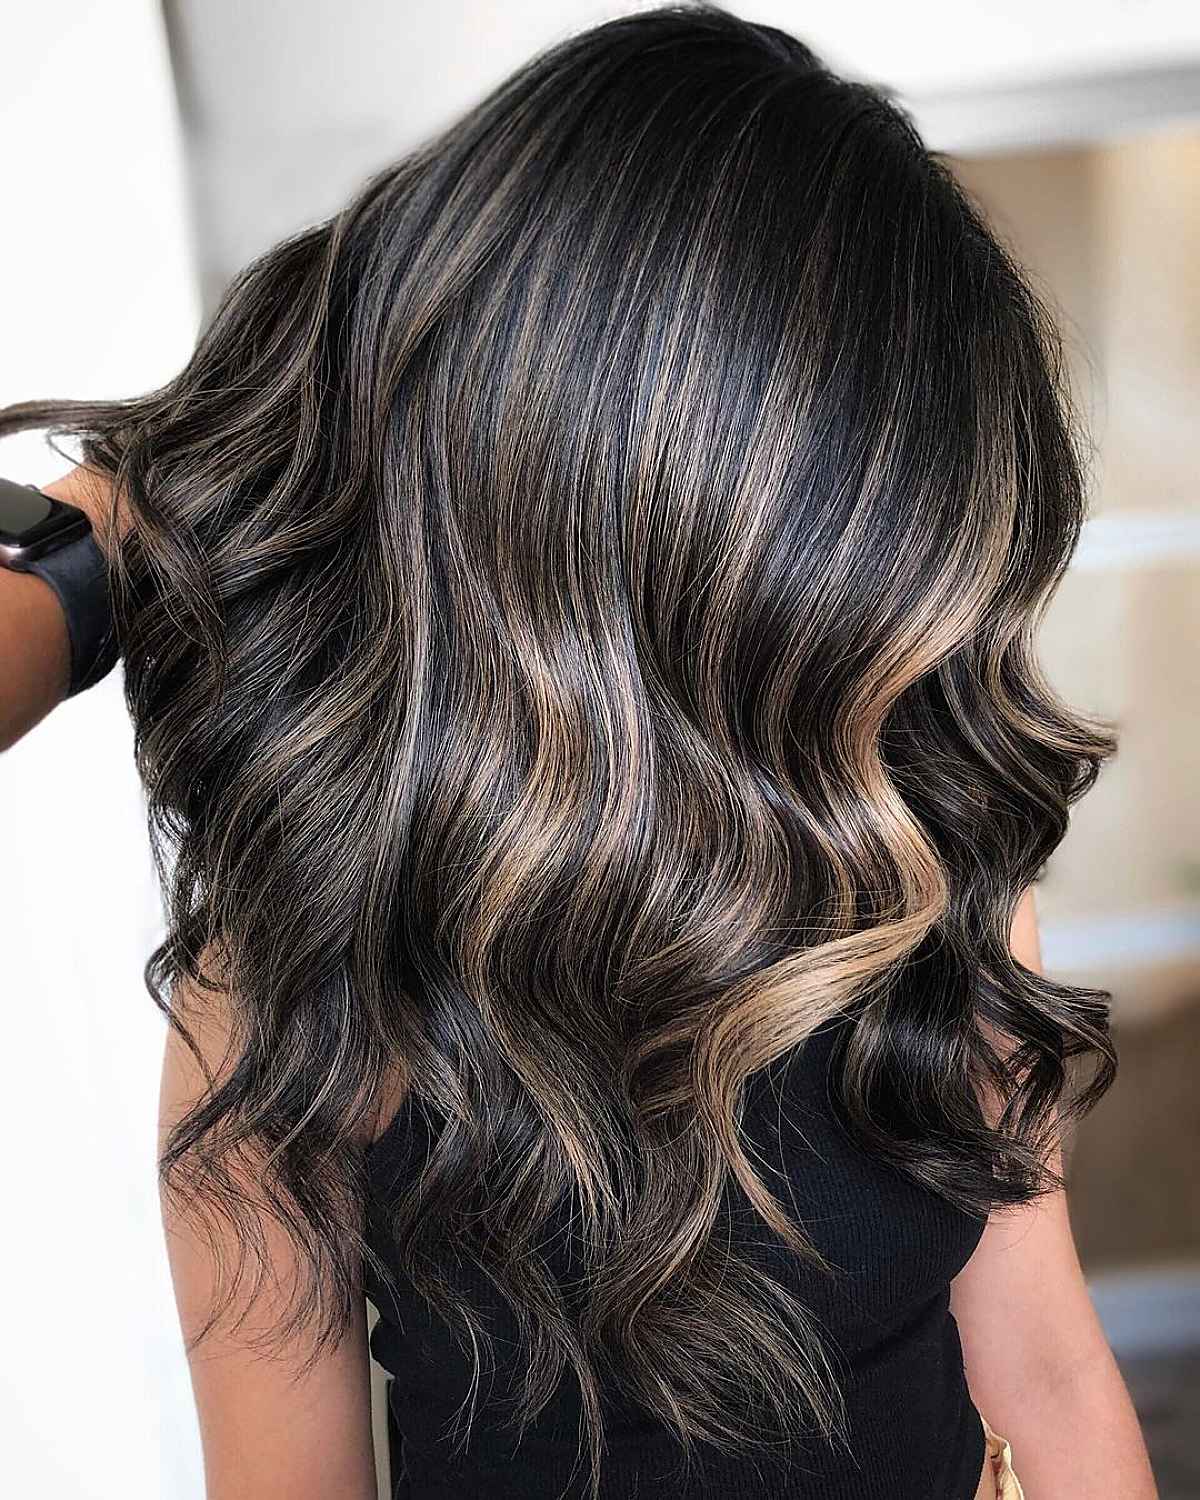 Partial balayage with highlights